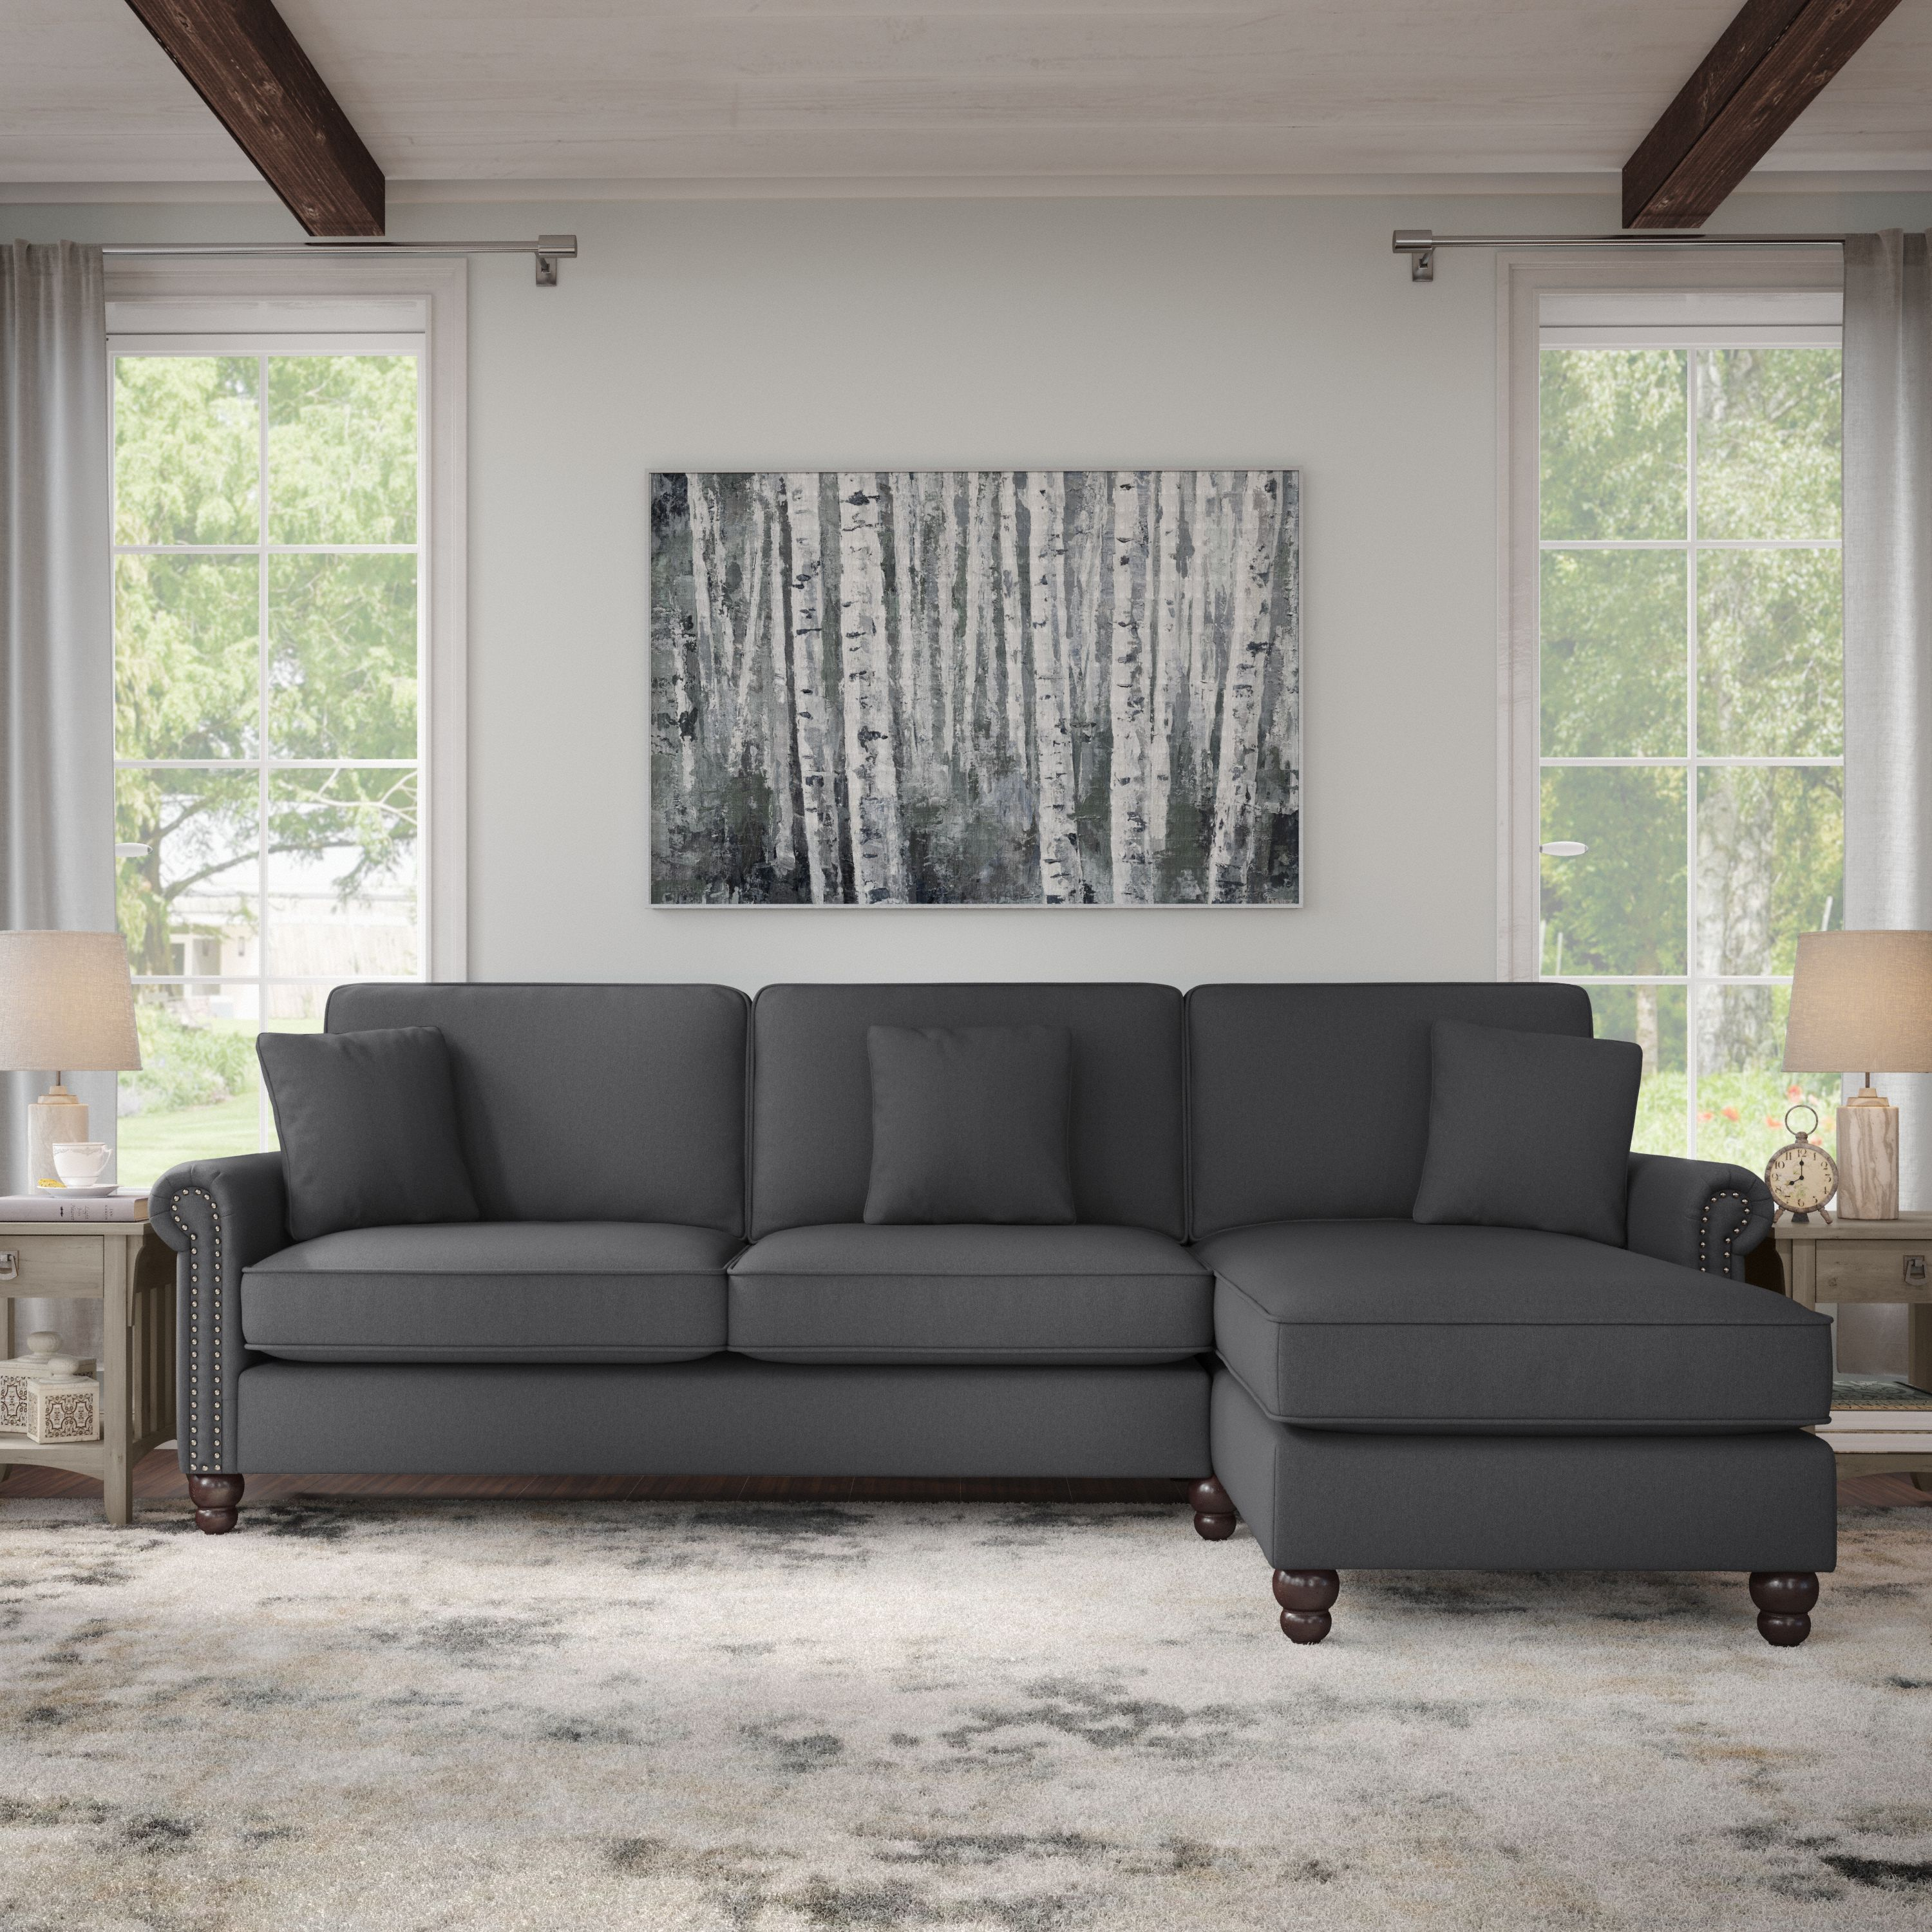 Shop Bush Furniture Coventry 102W Sectional Couch with Reversible Chaise Lounge 01 CVY102BCGH-03K #color_charcoal gray herringbone fabr